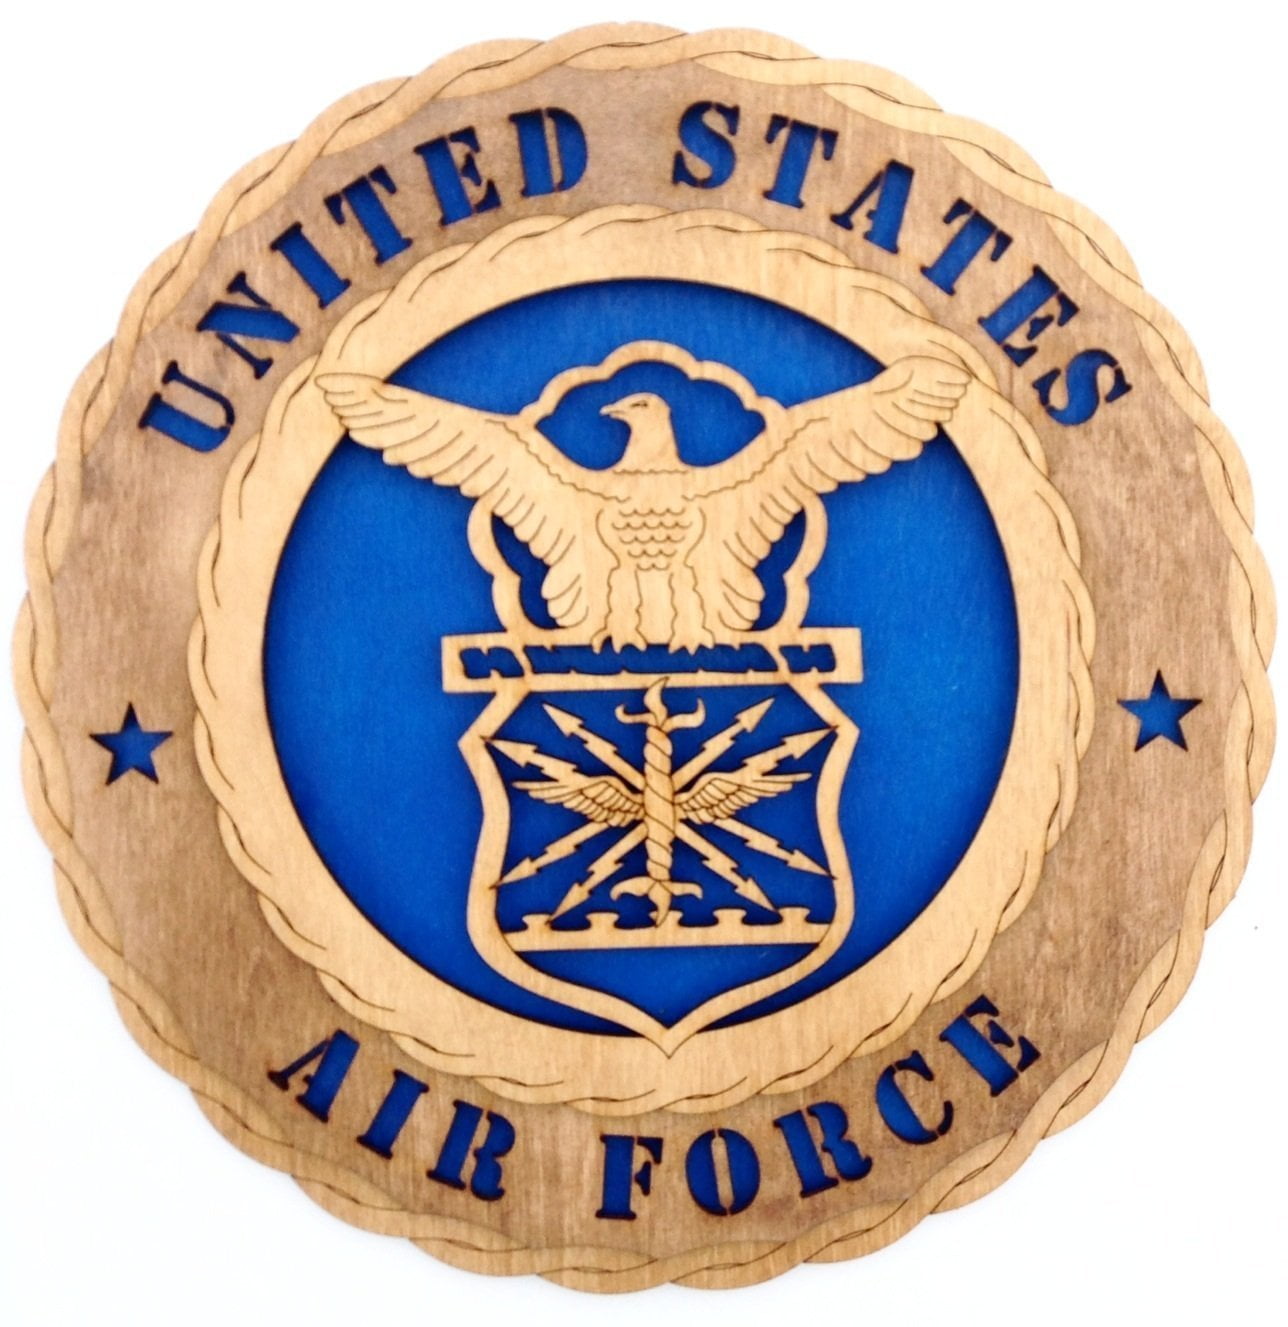 Armed Forces Air Force Custom Laser Accents Unique Decorative Custom Laser Crafted Three Dimensional Wooden Wall Plaque 